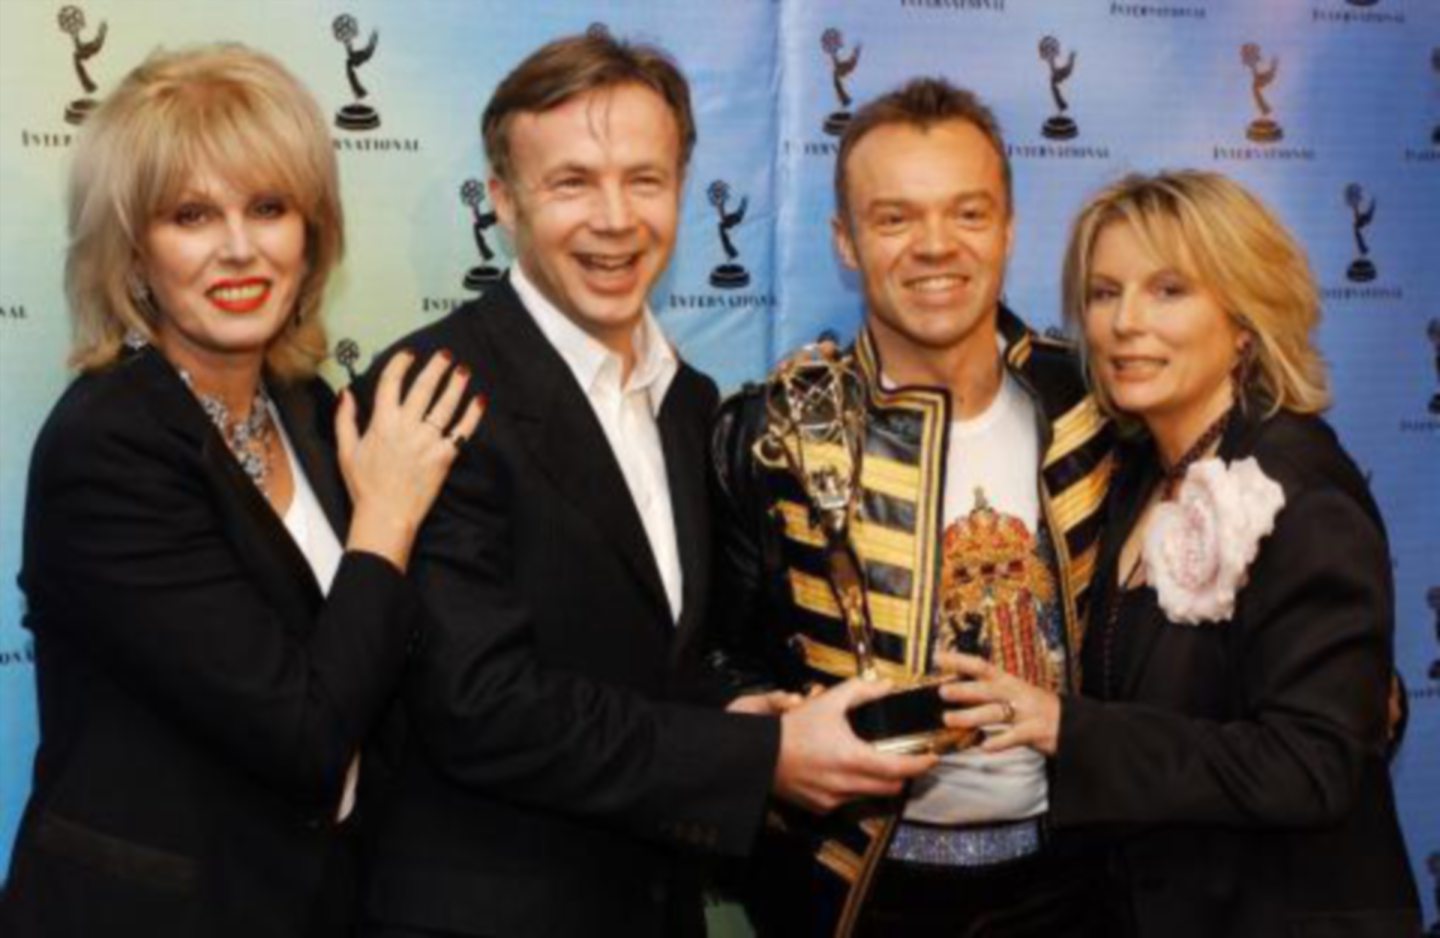 British actresses Joanna Lumley (L) and Jennifer Saunders (R), stars of "Absolutely Fabulous" pose with British talk show host Graham Norton (2nd R) and Graham Stuart (2nd L) at the 29th International Emmy Awards, in New York City. *... Norton and Stuart won the Popular Arts category with the Channel 4 show, "So Graham Norton-Show 18". Lumley and Saunders were presenters during the event. Saunders were presenters during the event.